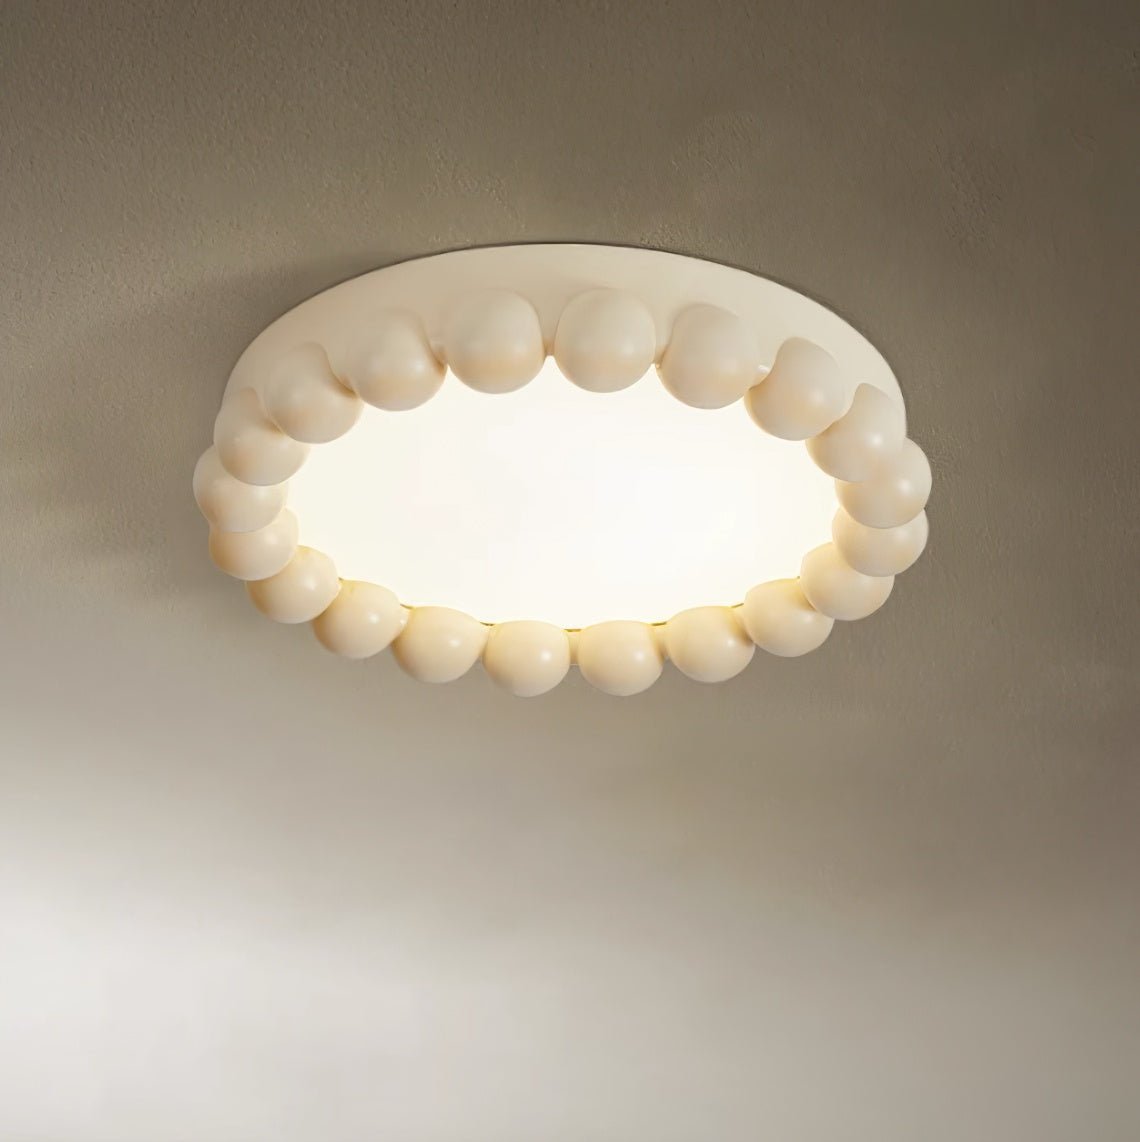 Ceiling Lamp Molina with Beige Shade, Cool White Light, Diameter 17.3" x Height 3.5" (44cm x 9cm)